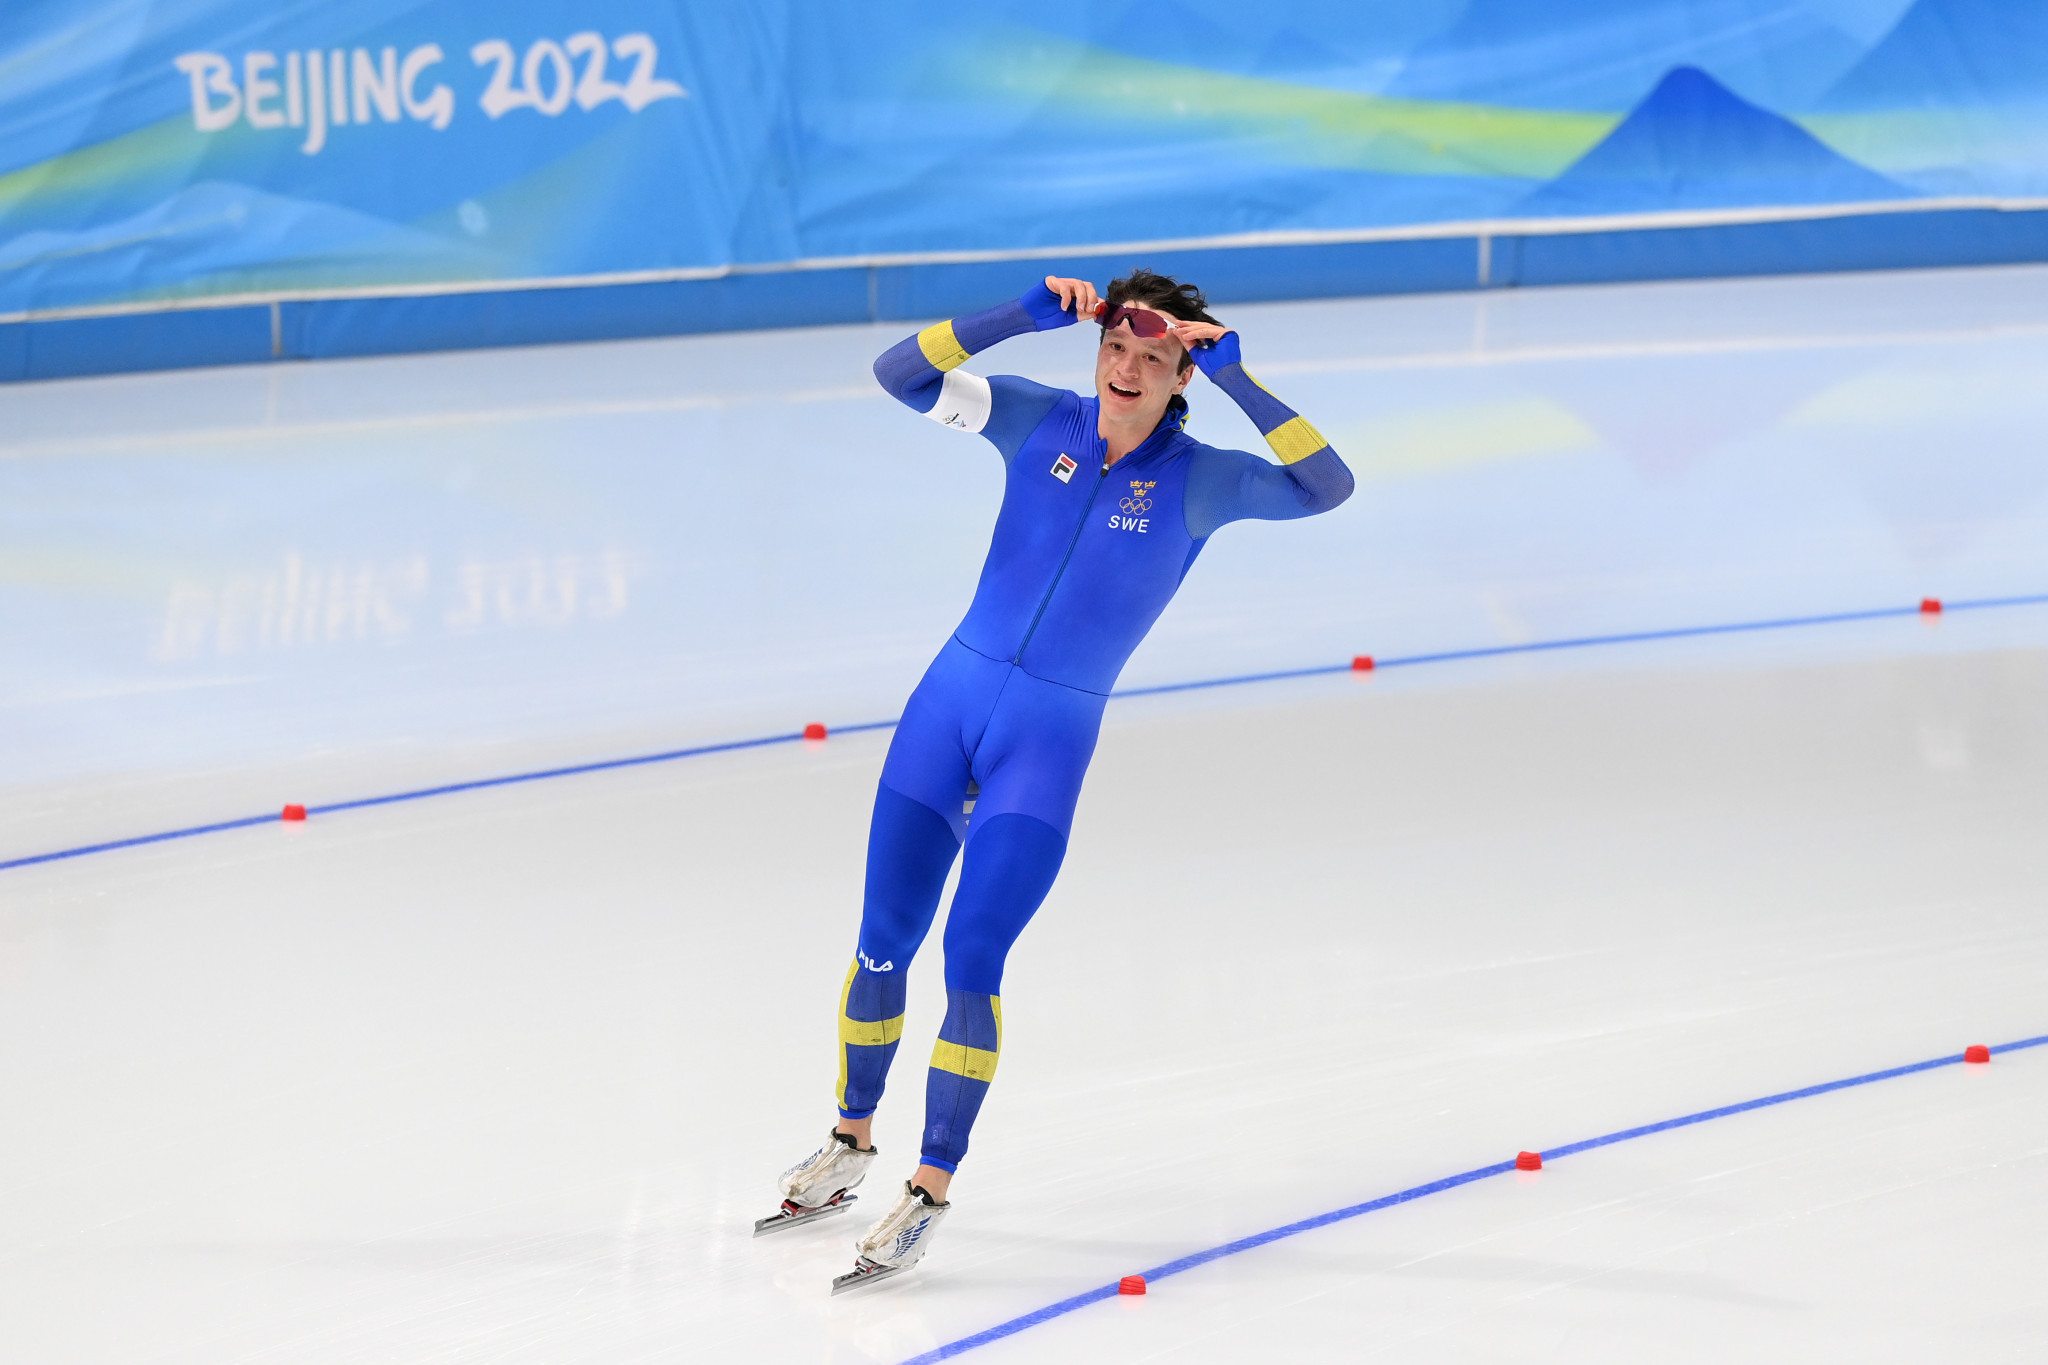 Van der Poel wins Sweden's first speed skating gold for 34 years in Olympic 5,000m record